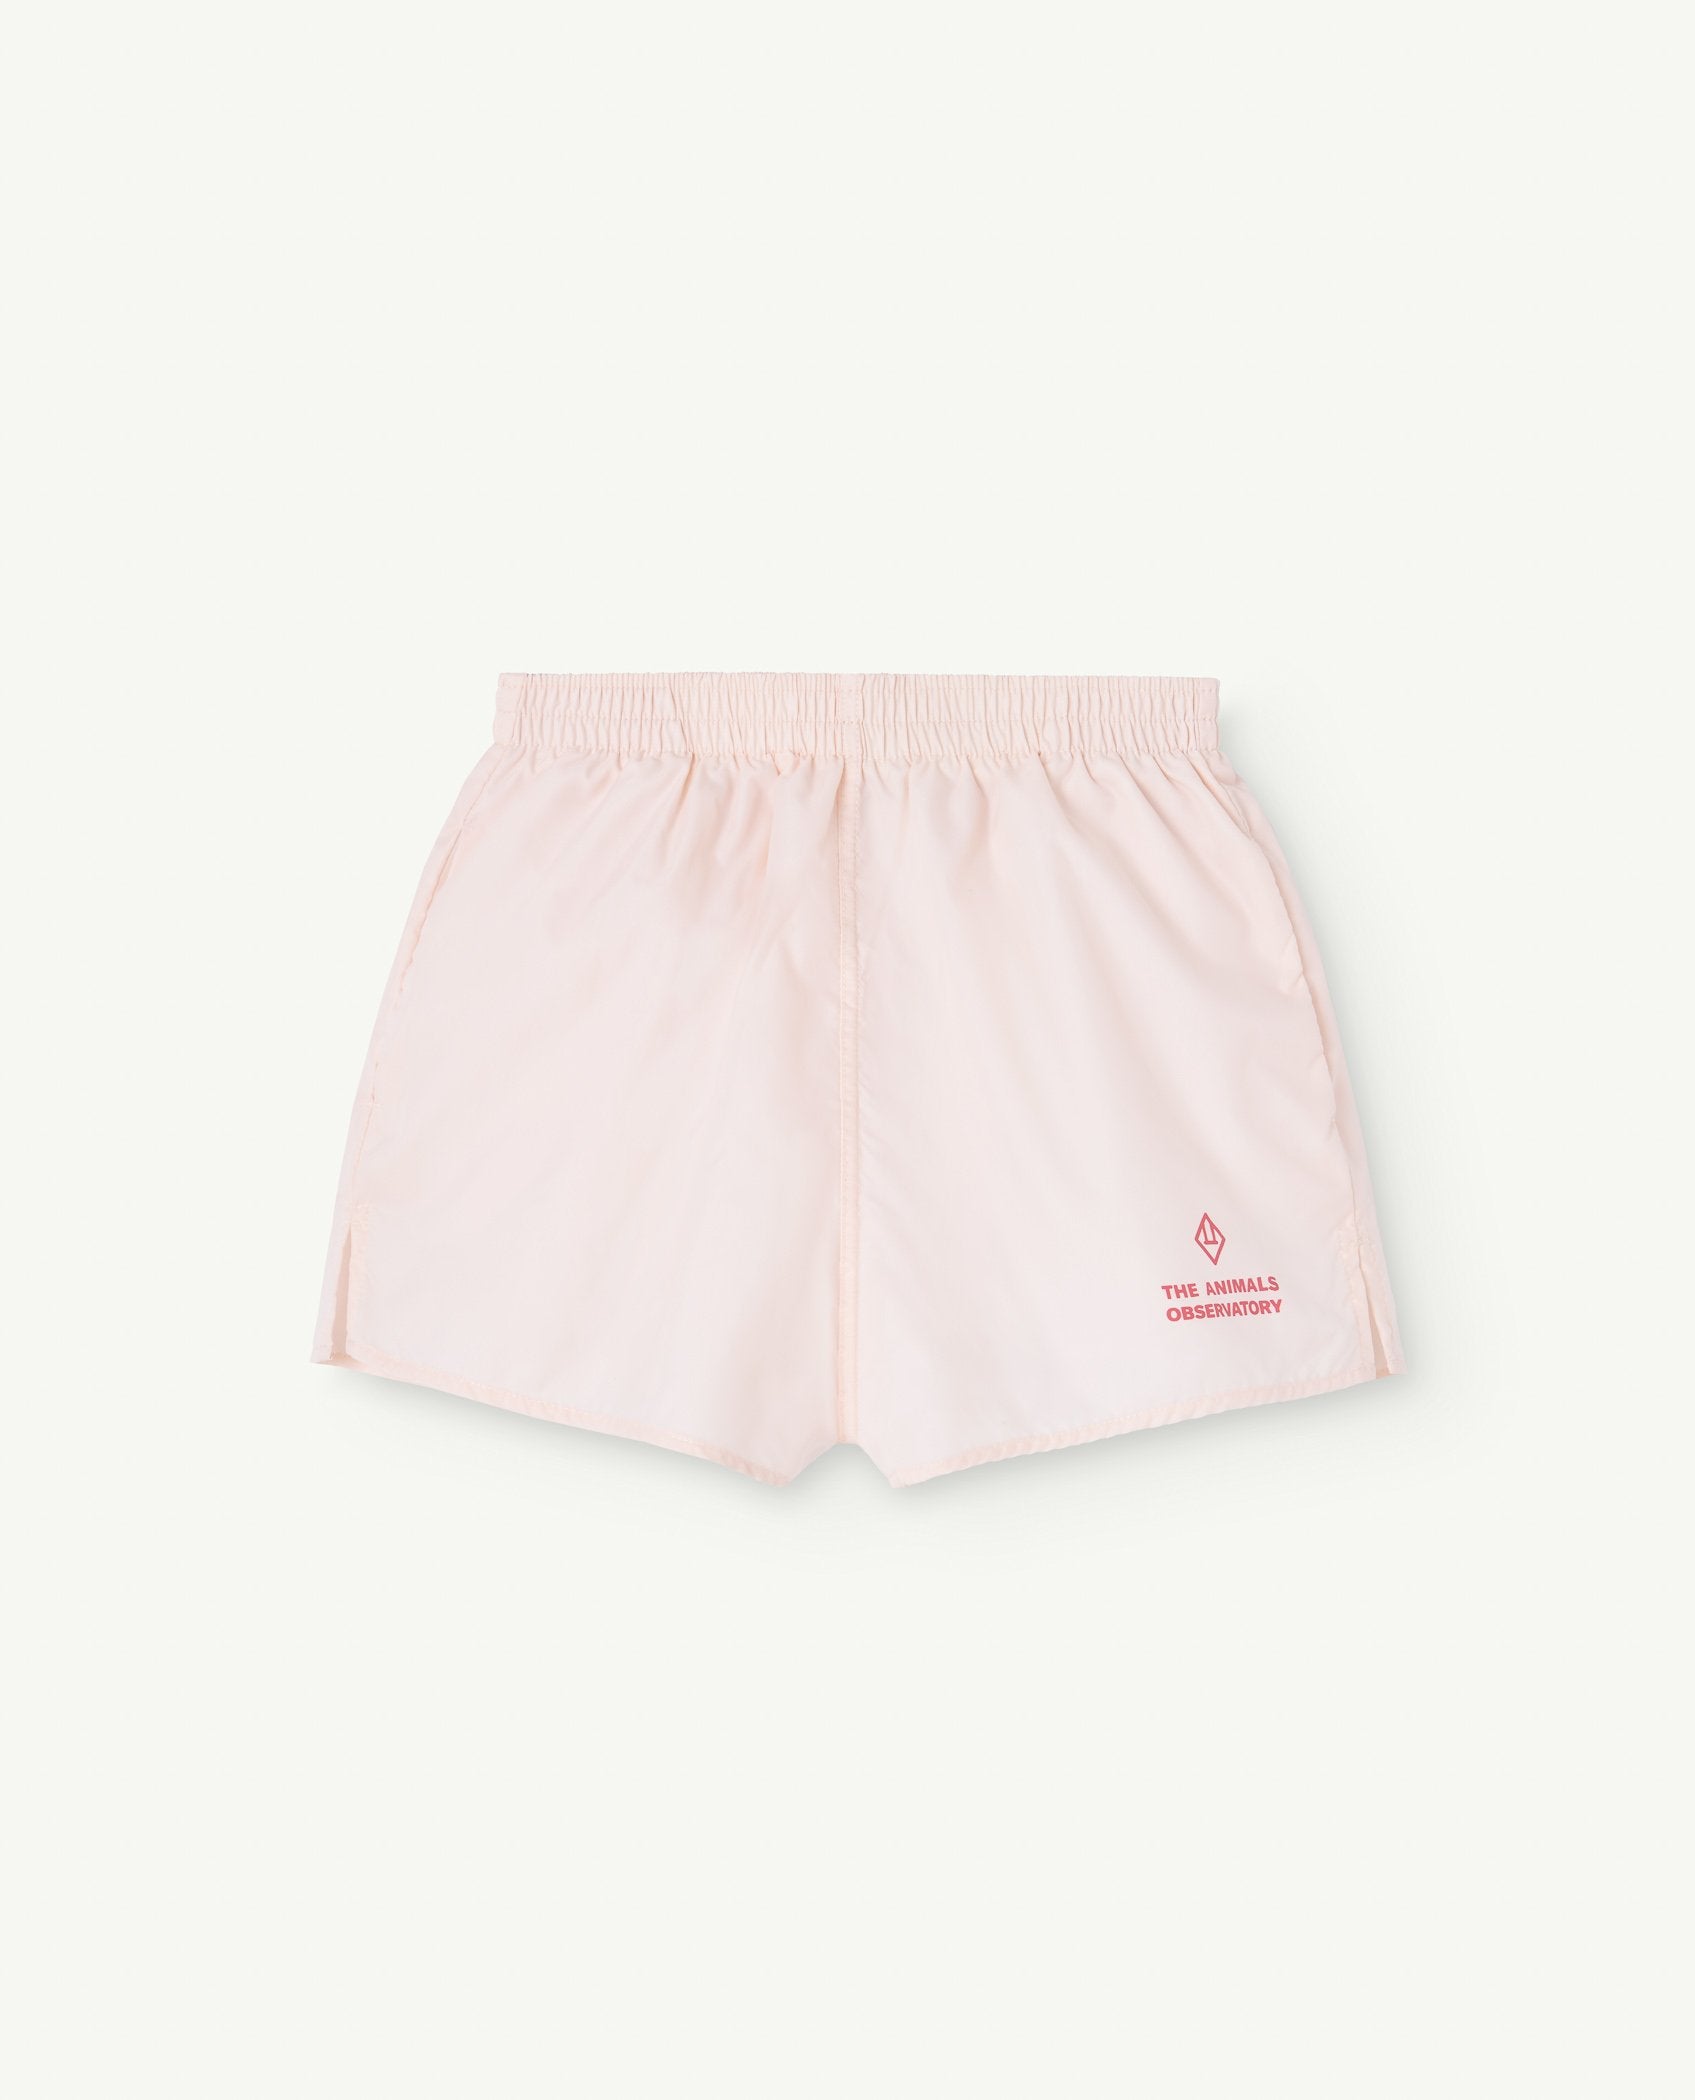 Salmon Lynx Kids Shorts PRODUCT FRONT